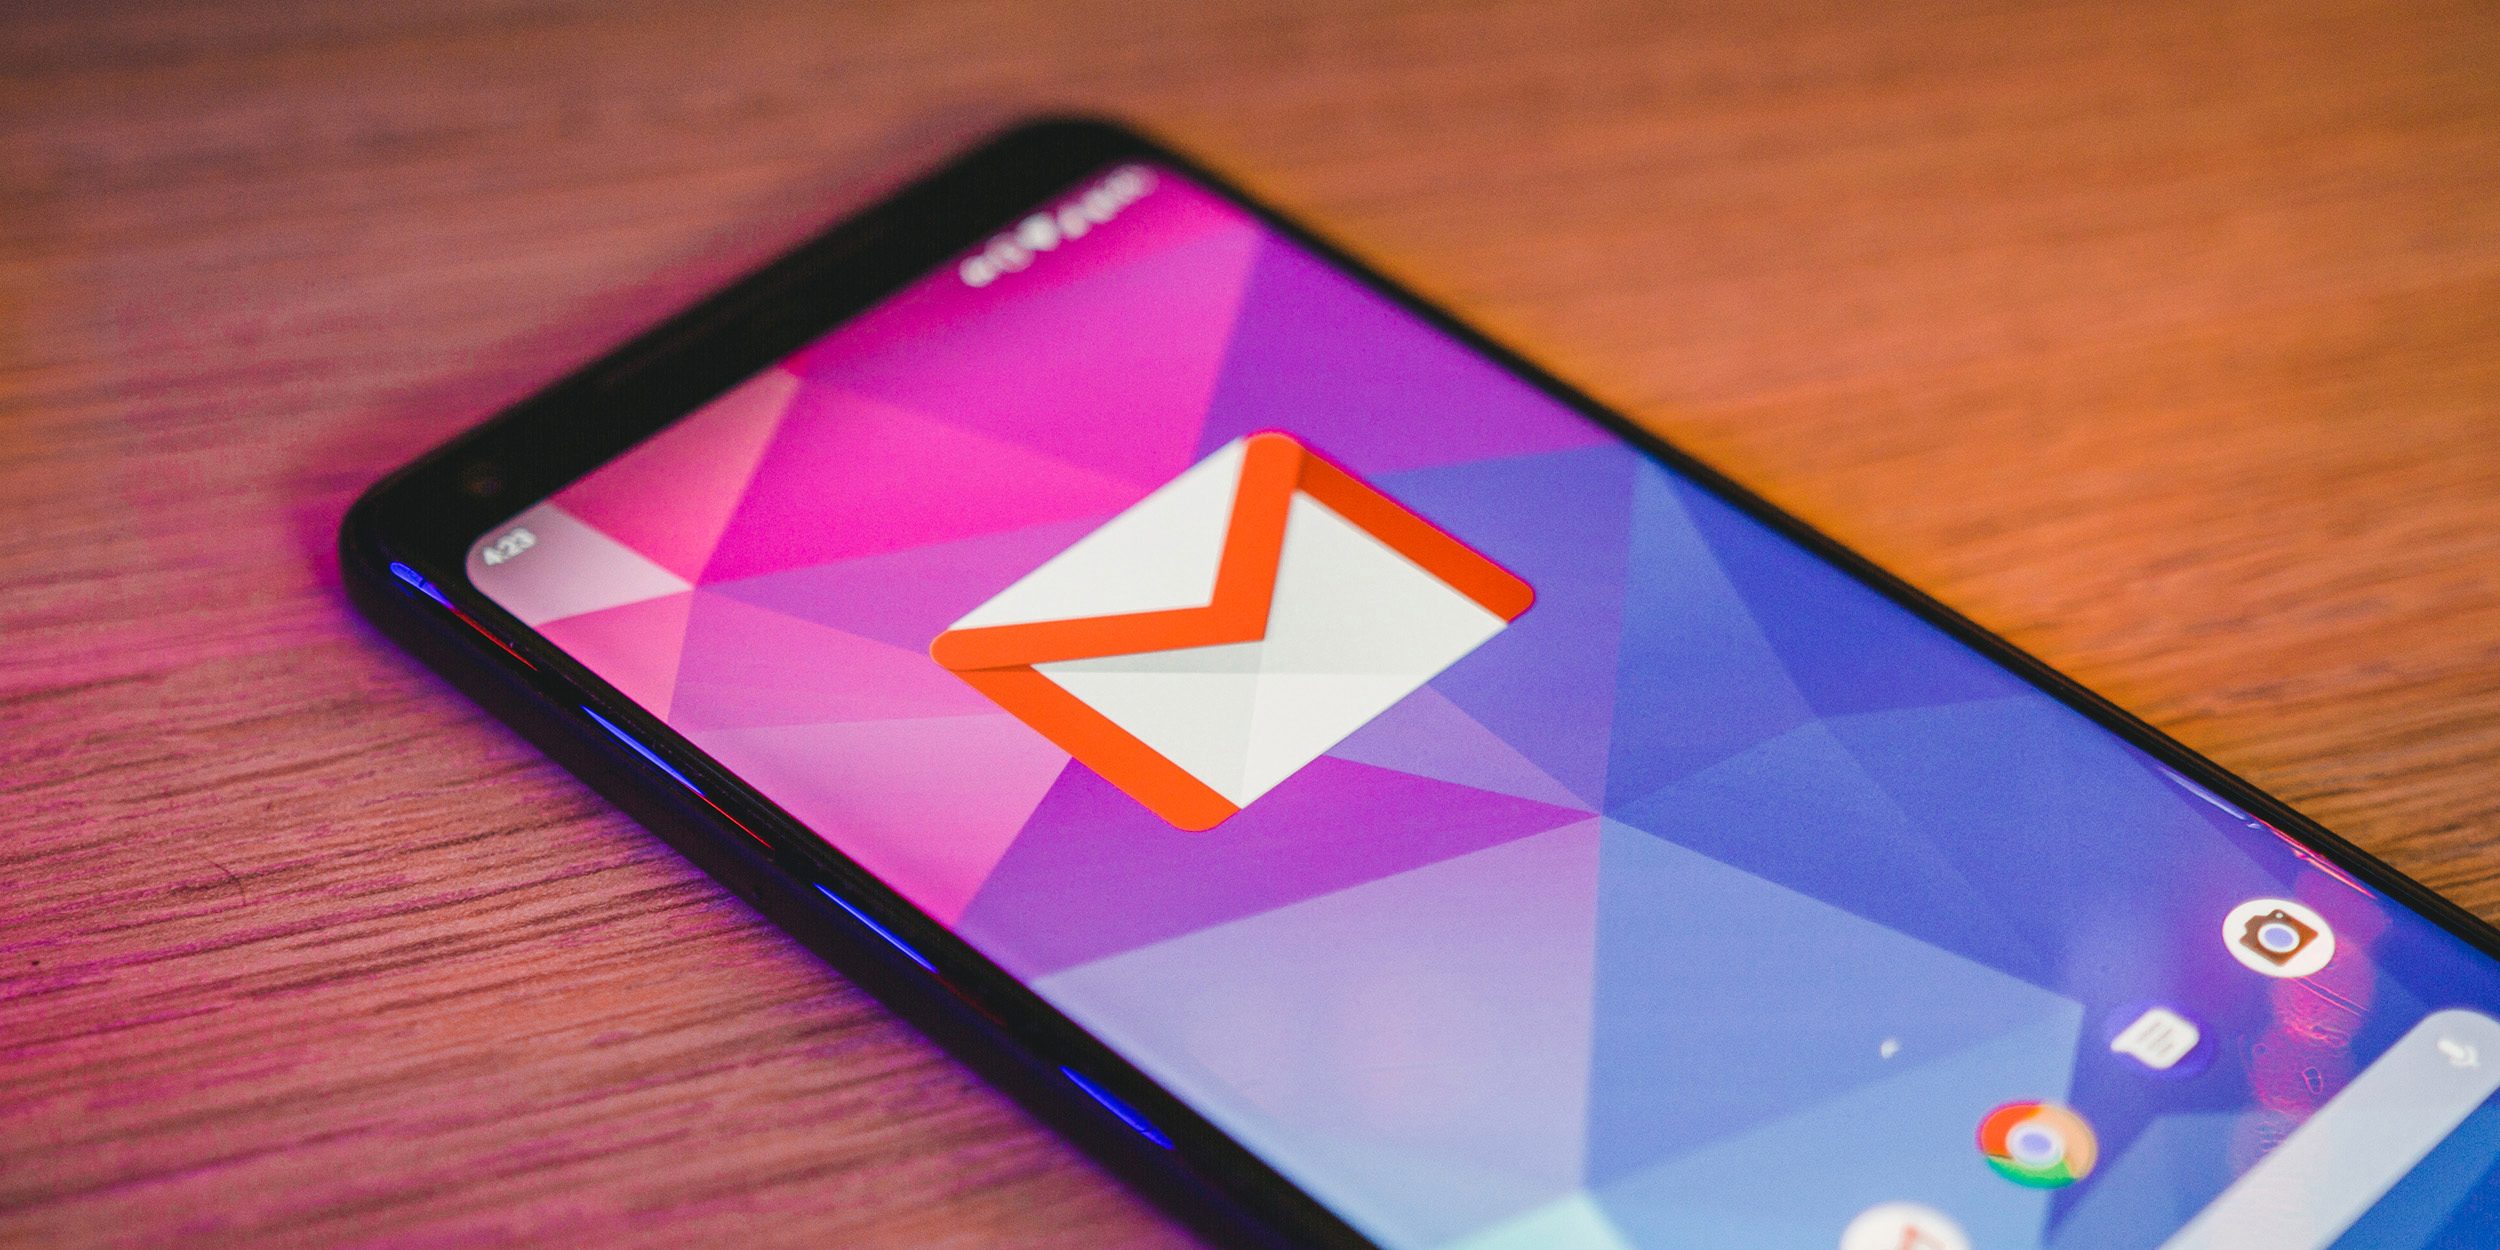 This week’s top stories: Gmail for Android early dark theme, Pixel 3a is a Best Seller, more